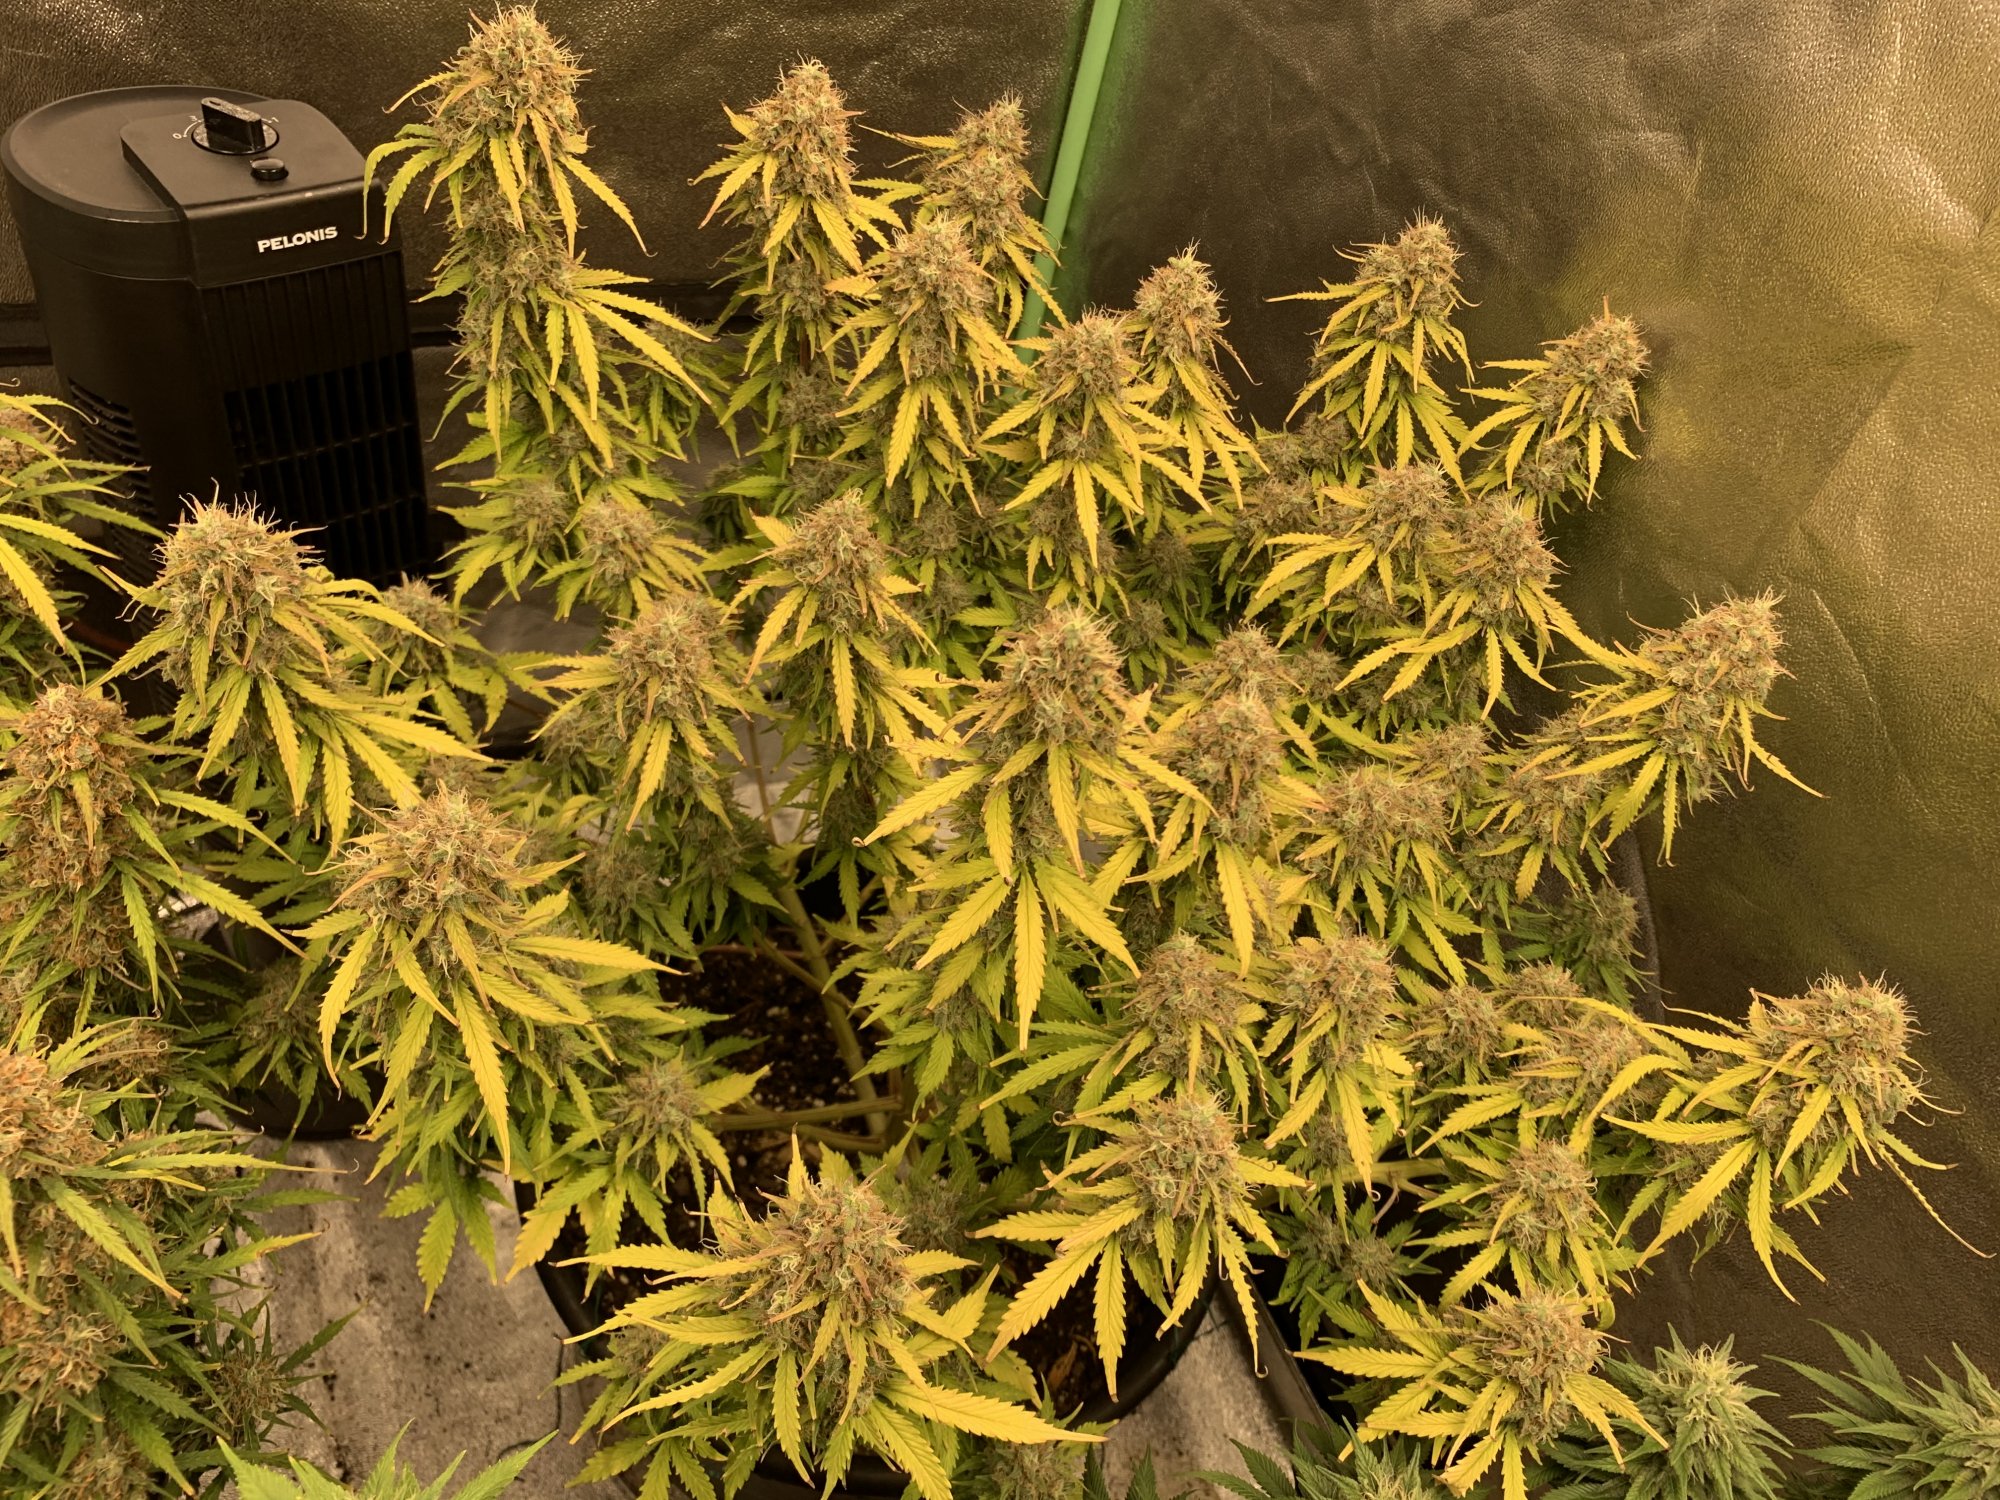 New grower using hlg quantum boards 16